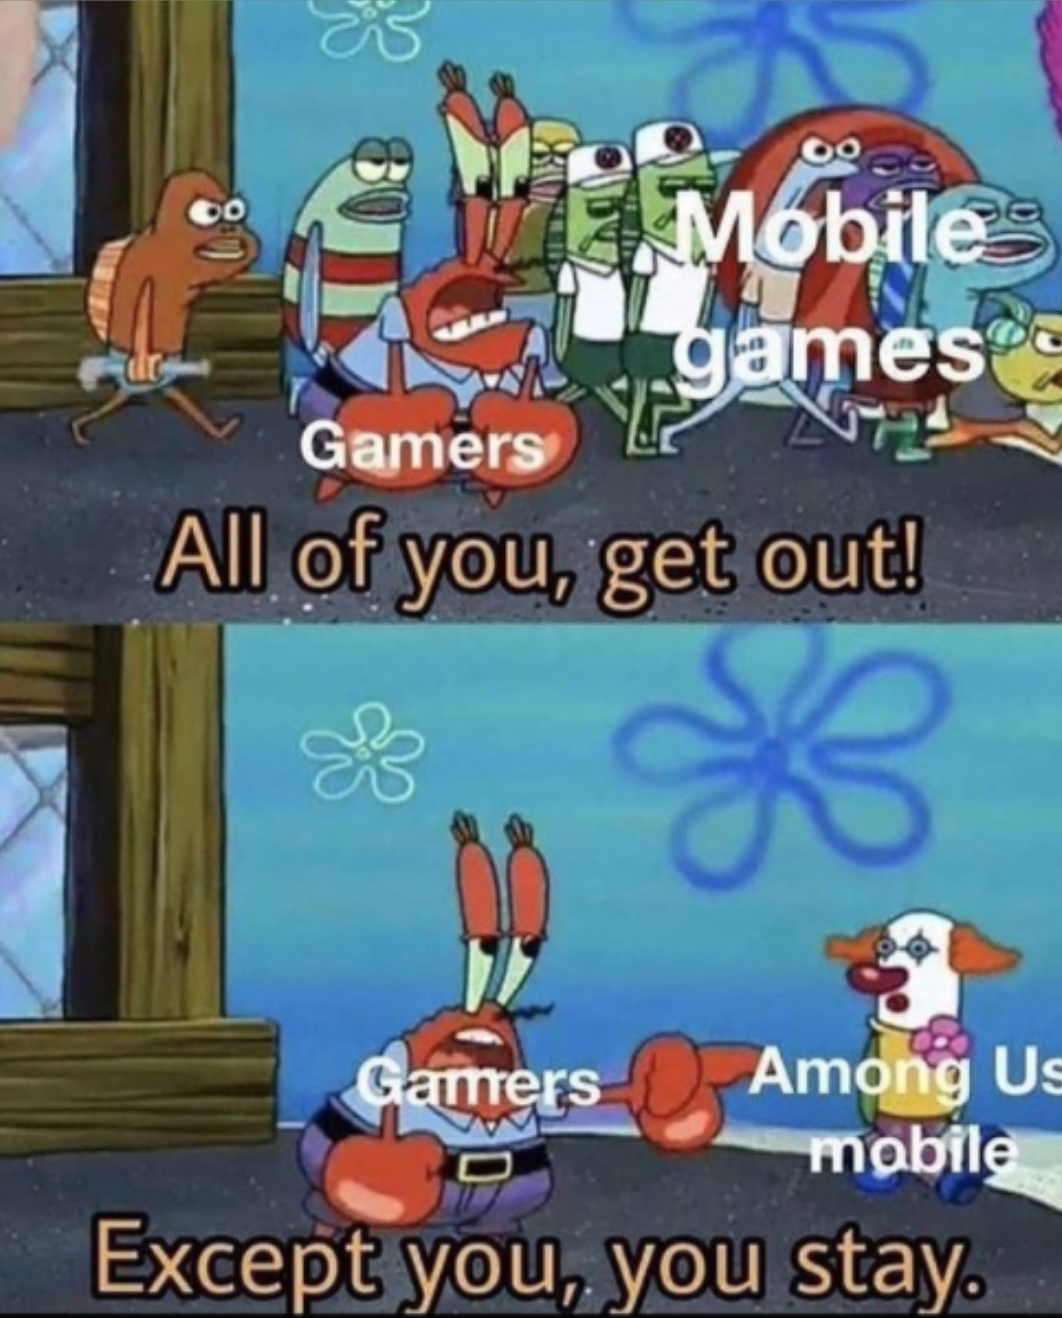 gaming memes - game among us memes - Wa Mobiles games Gamers All of you, get out! Garrers Among Us mabile Except you, you stay.